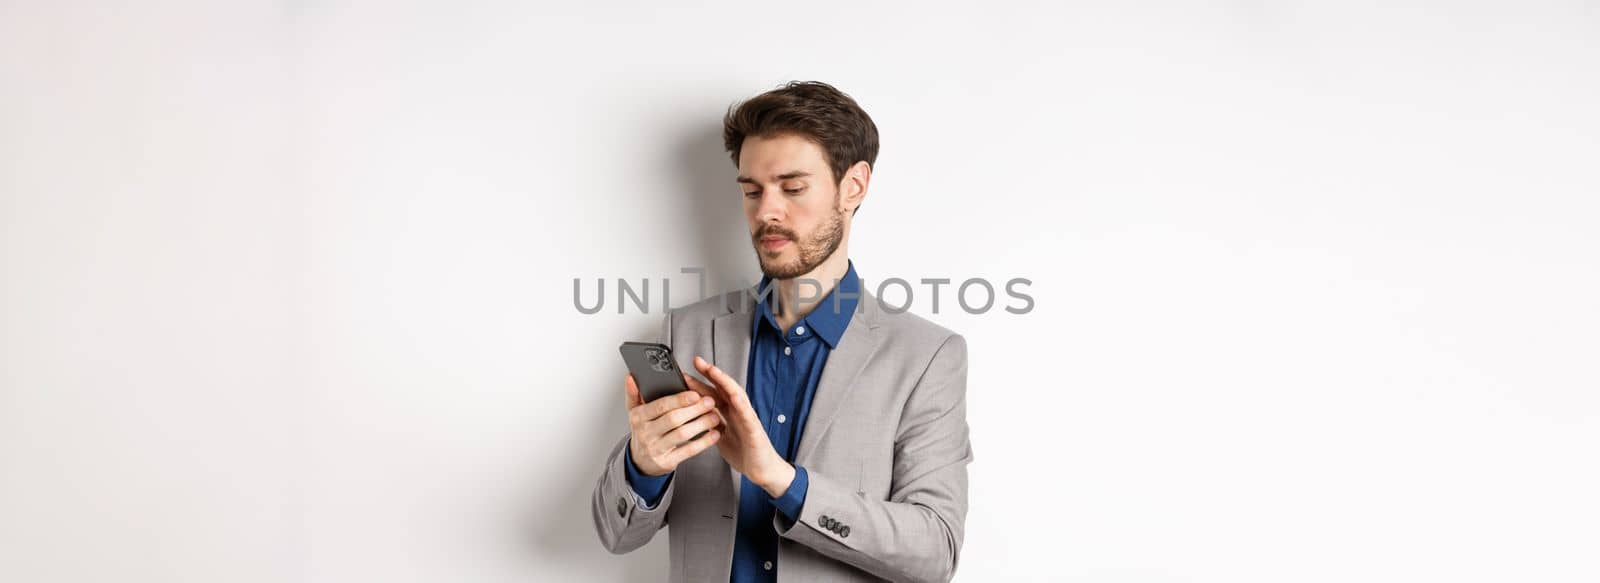 Young businessman in suit texting message on mobile phone, looking at smartphone, standing against white background.